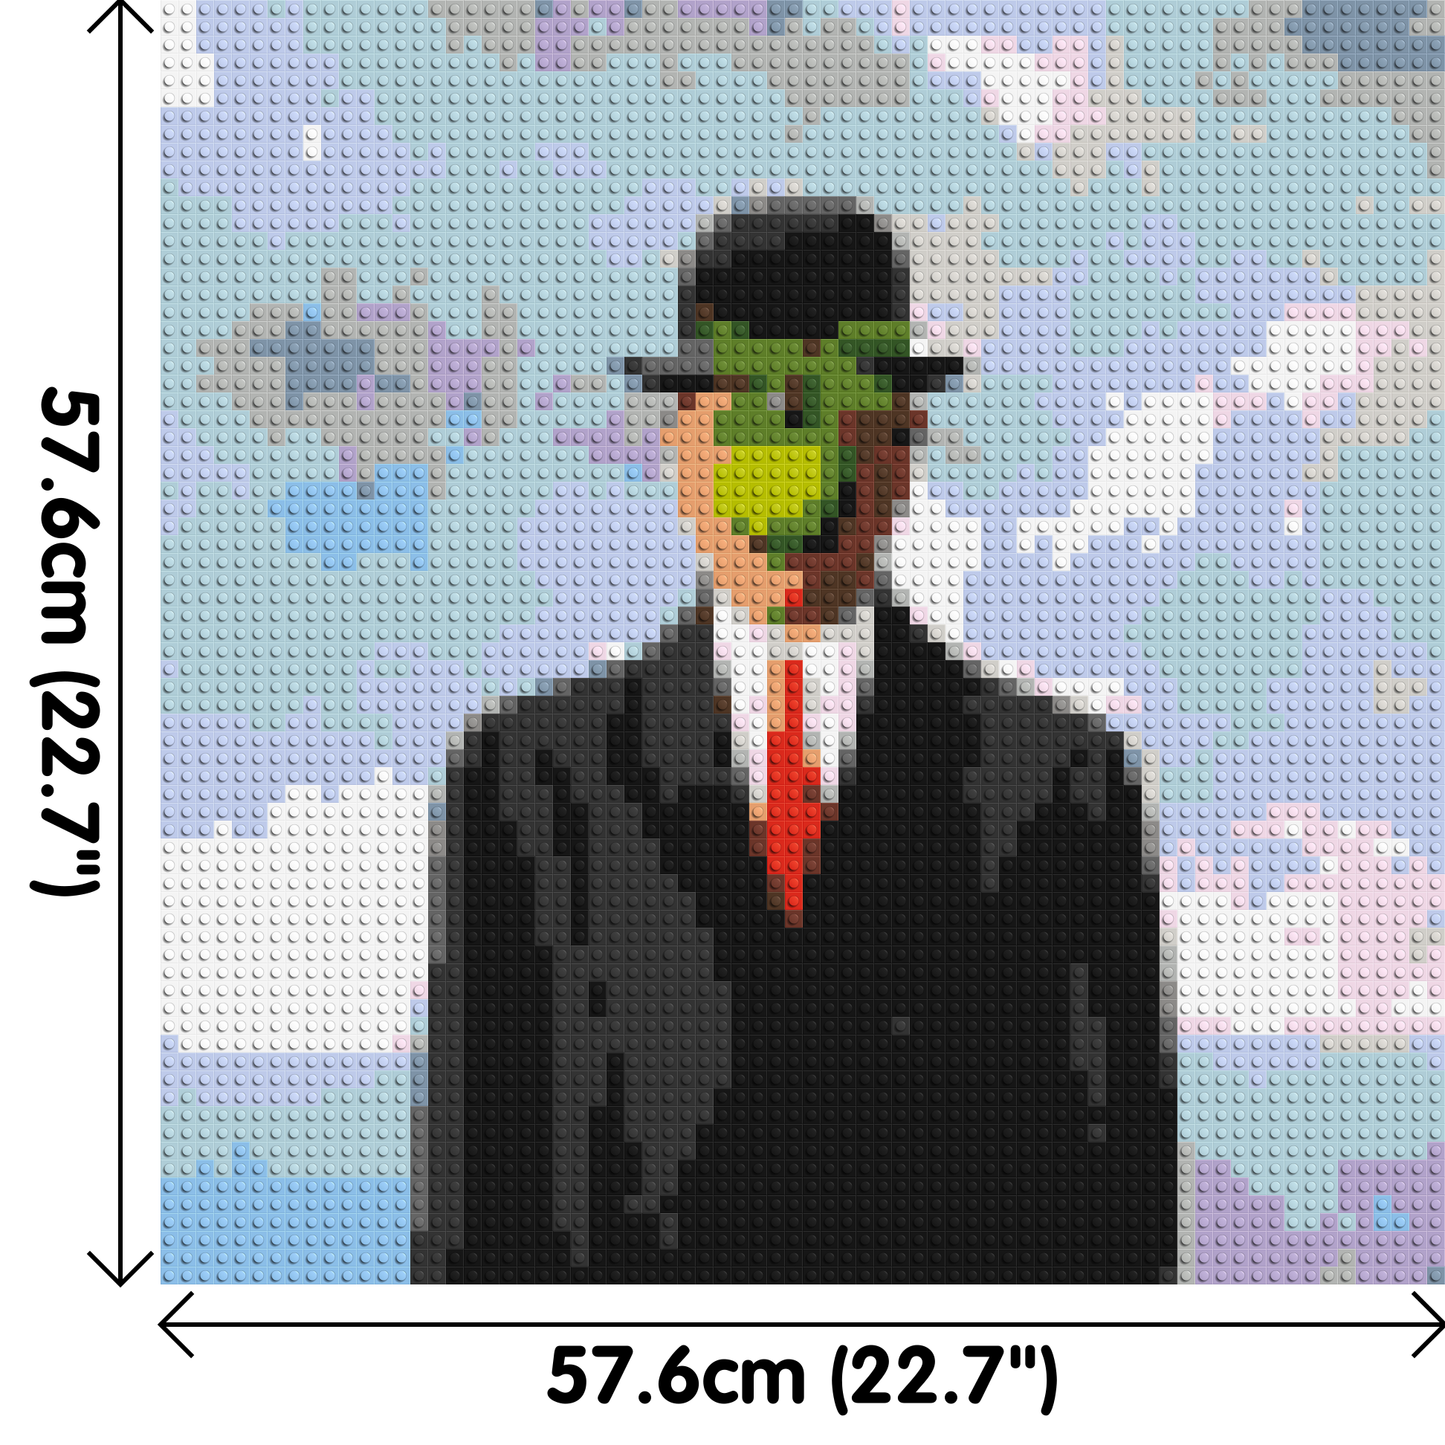 The Son of Man by René Magritte - Brick Art Mosaic Kit 3x3 large